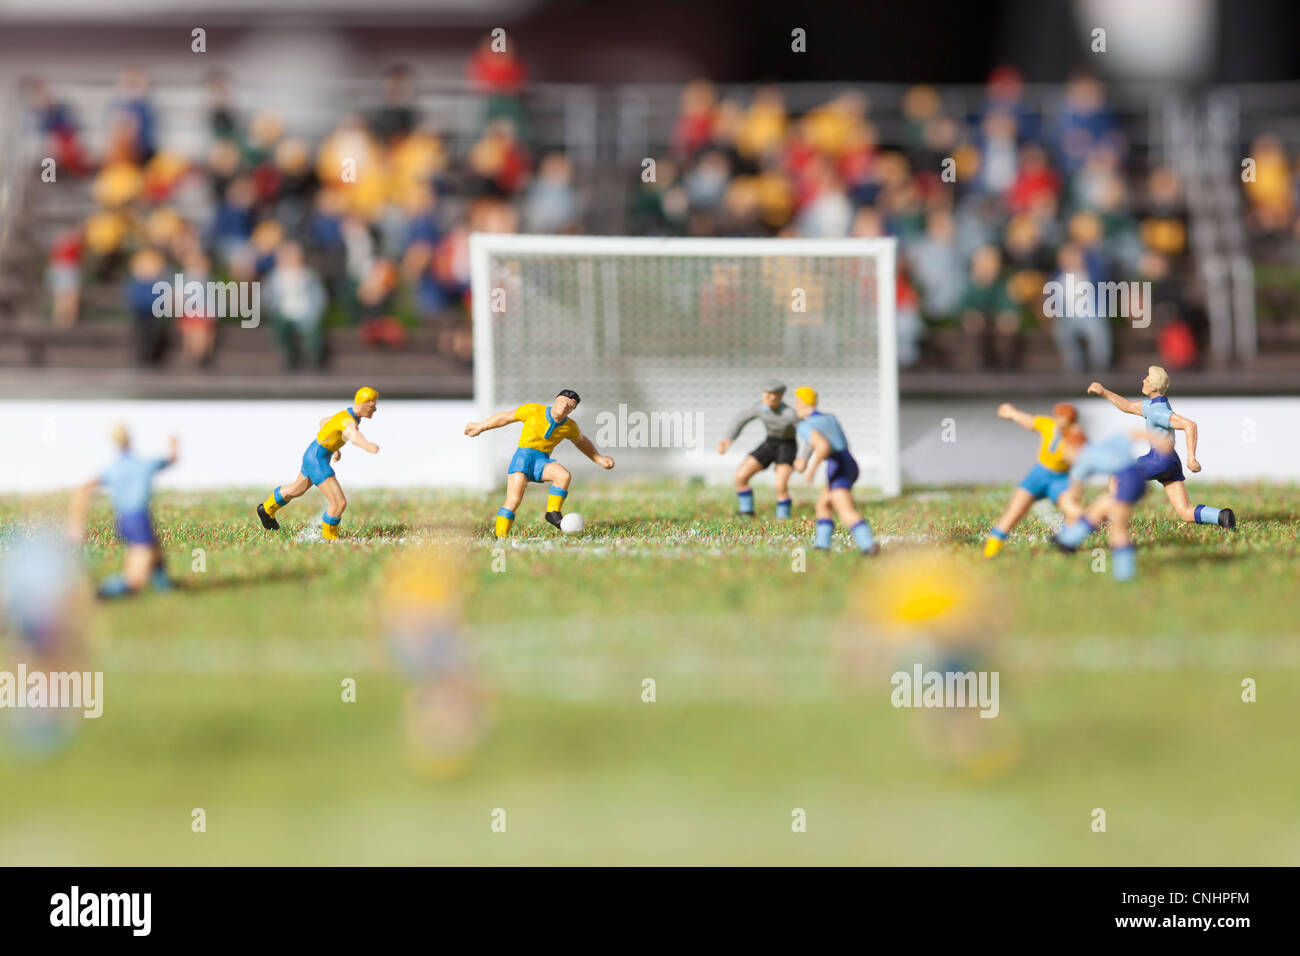 Miniature figurines of two soccer teams playing a soccer match Stock Photo